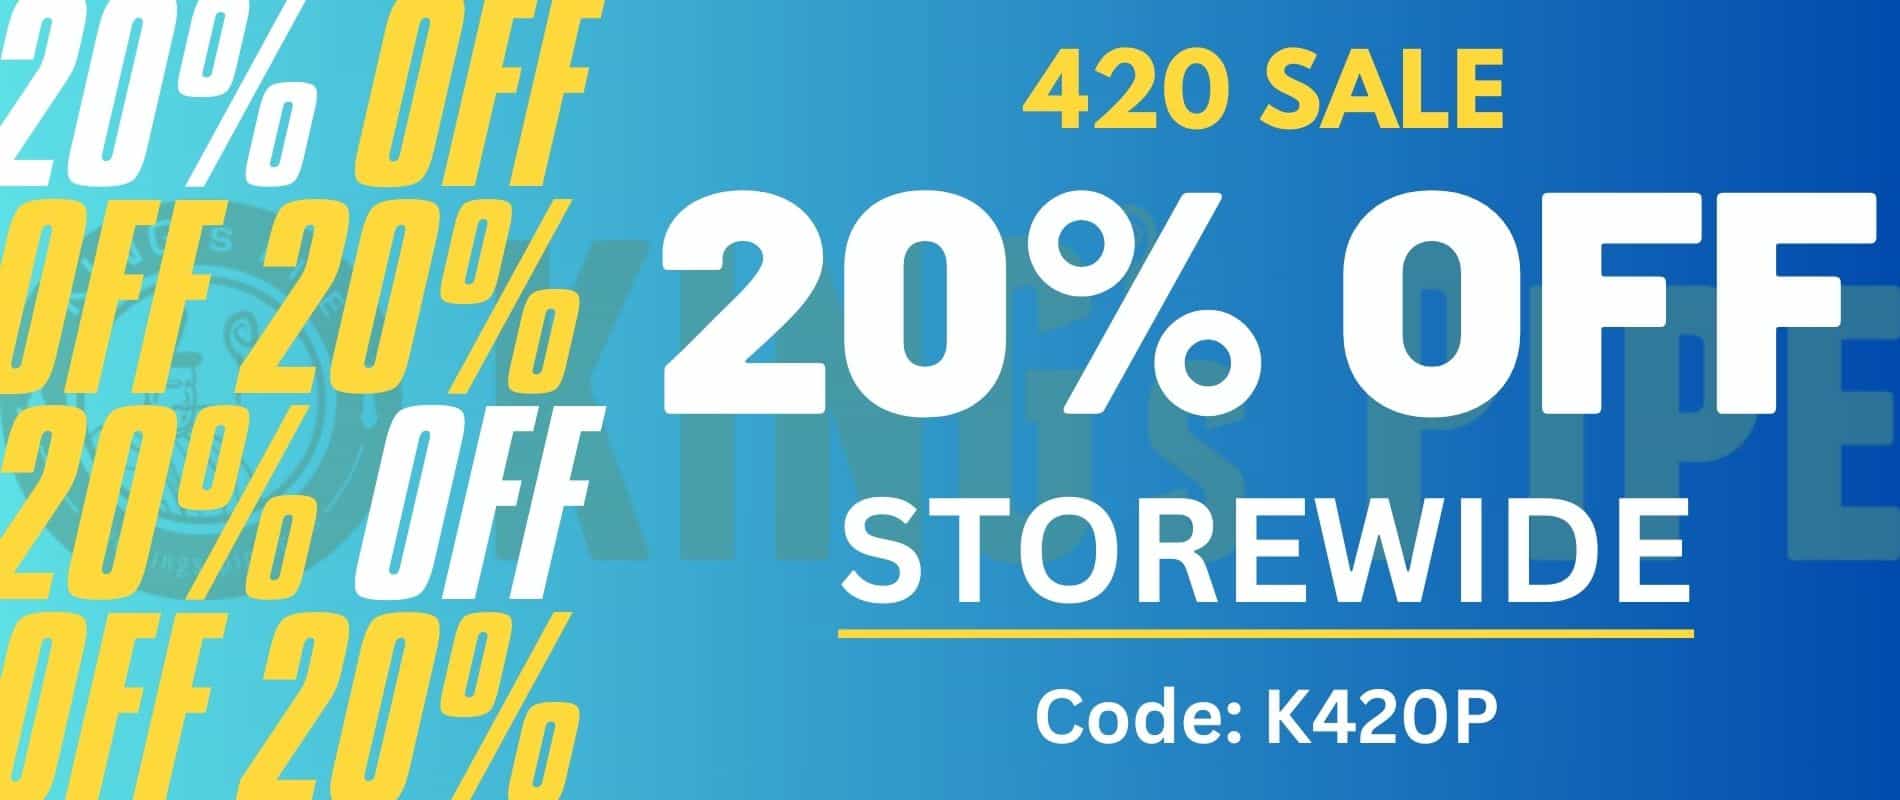 420 sale for bong deals and vape pen promo on kings pipe online headshop